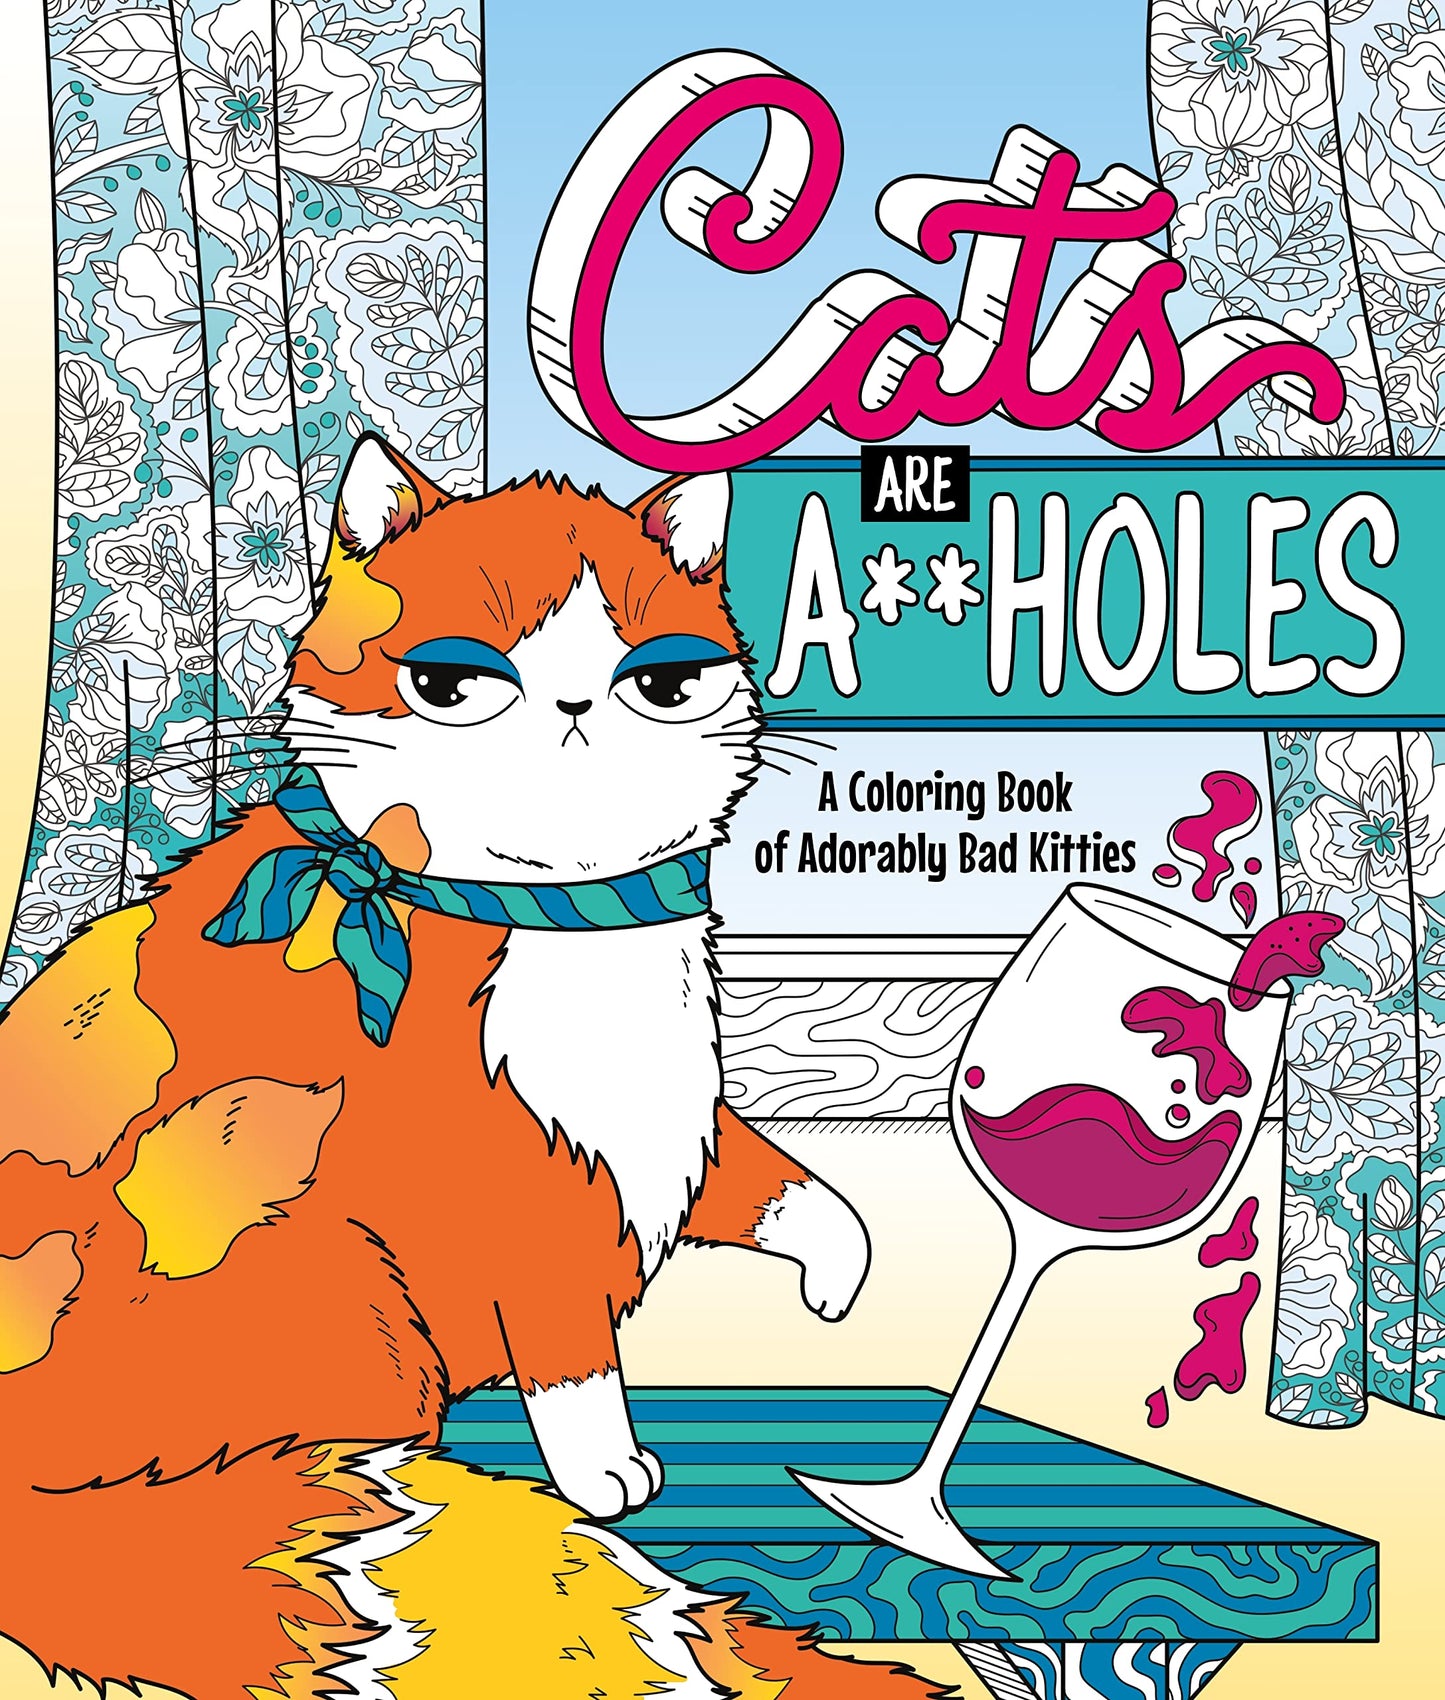 Cats Are A**holes: A Coloring Book of Adorably Bad Kitties